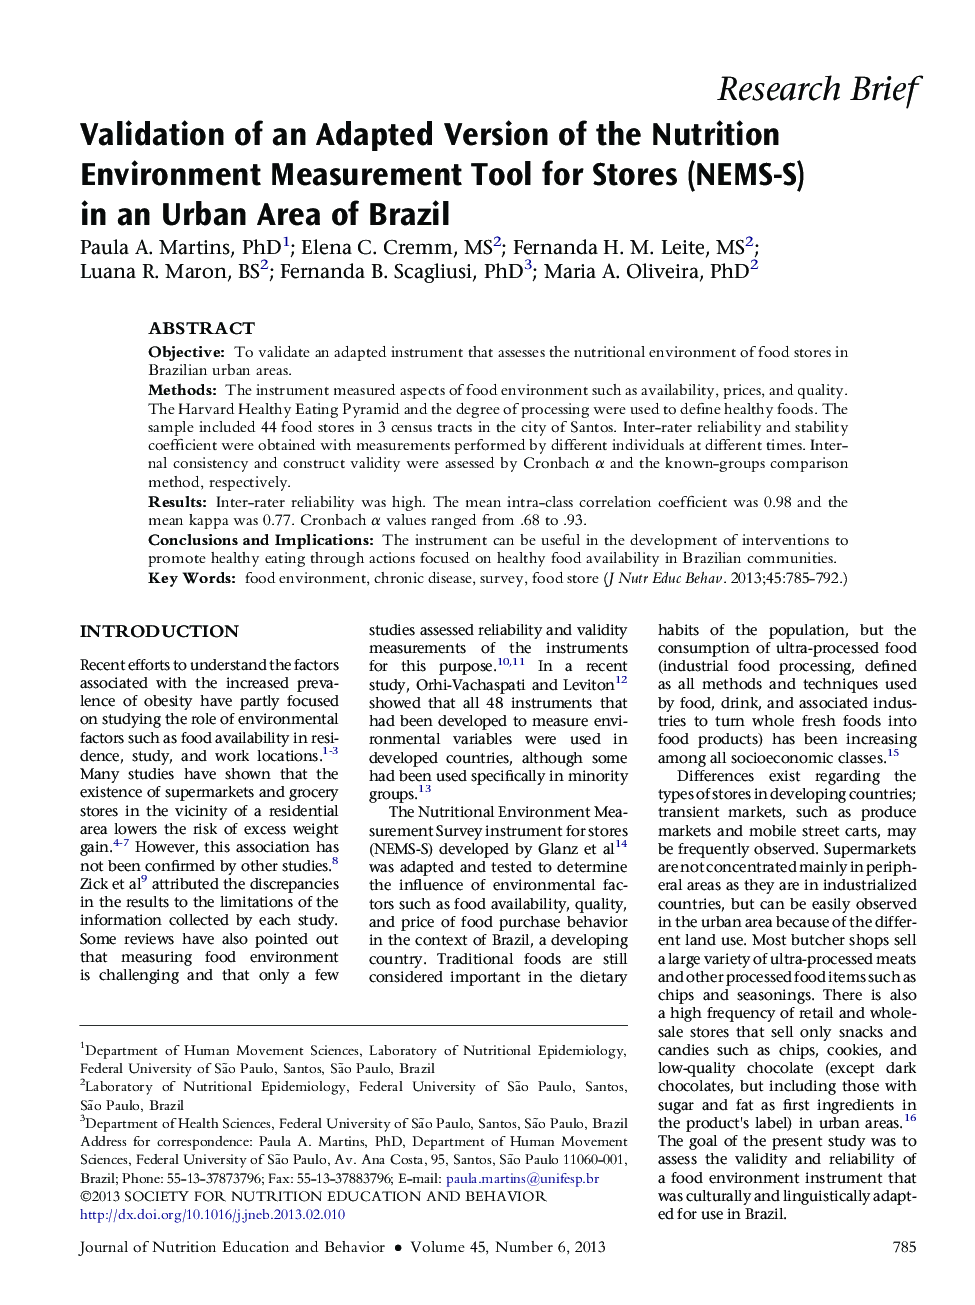 Validation of an Adapted Version of the Nutrition Environment Measurement Tool for Stores (NEMS-S) in an Urban Area of Brazil